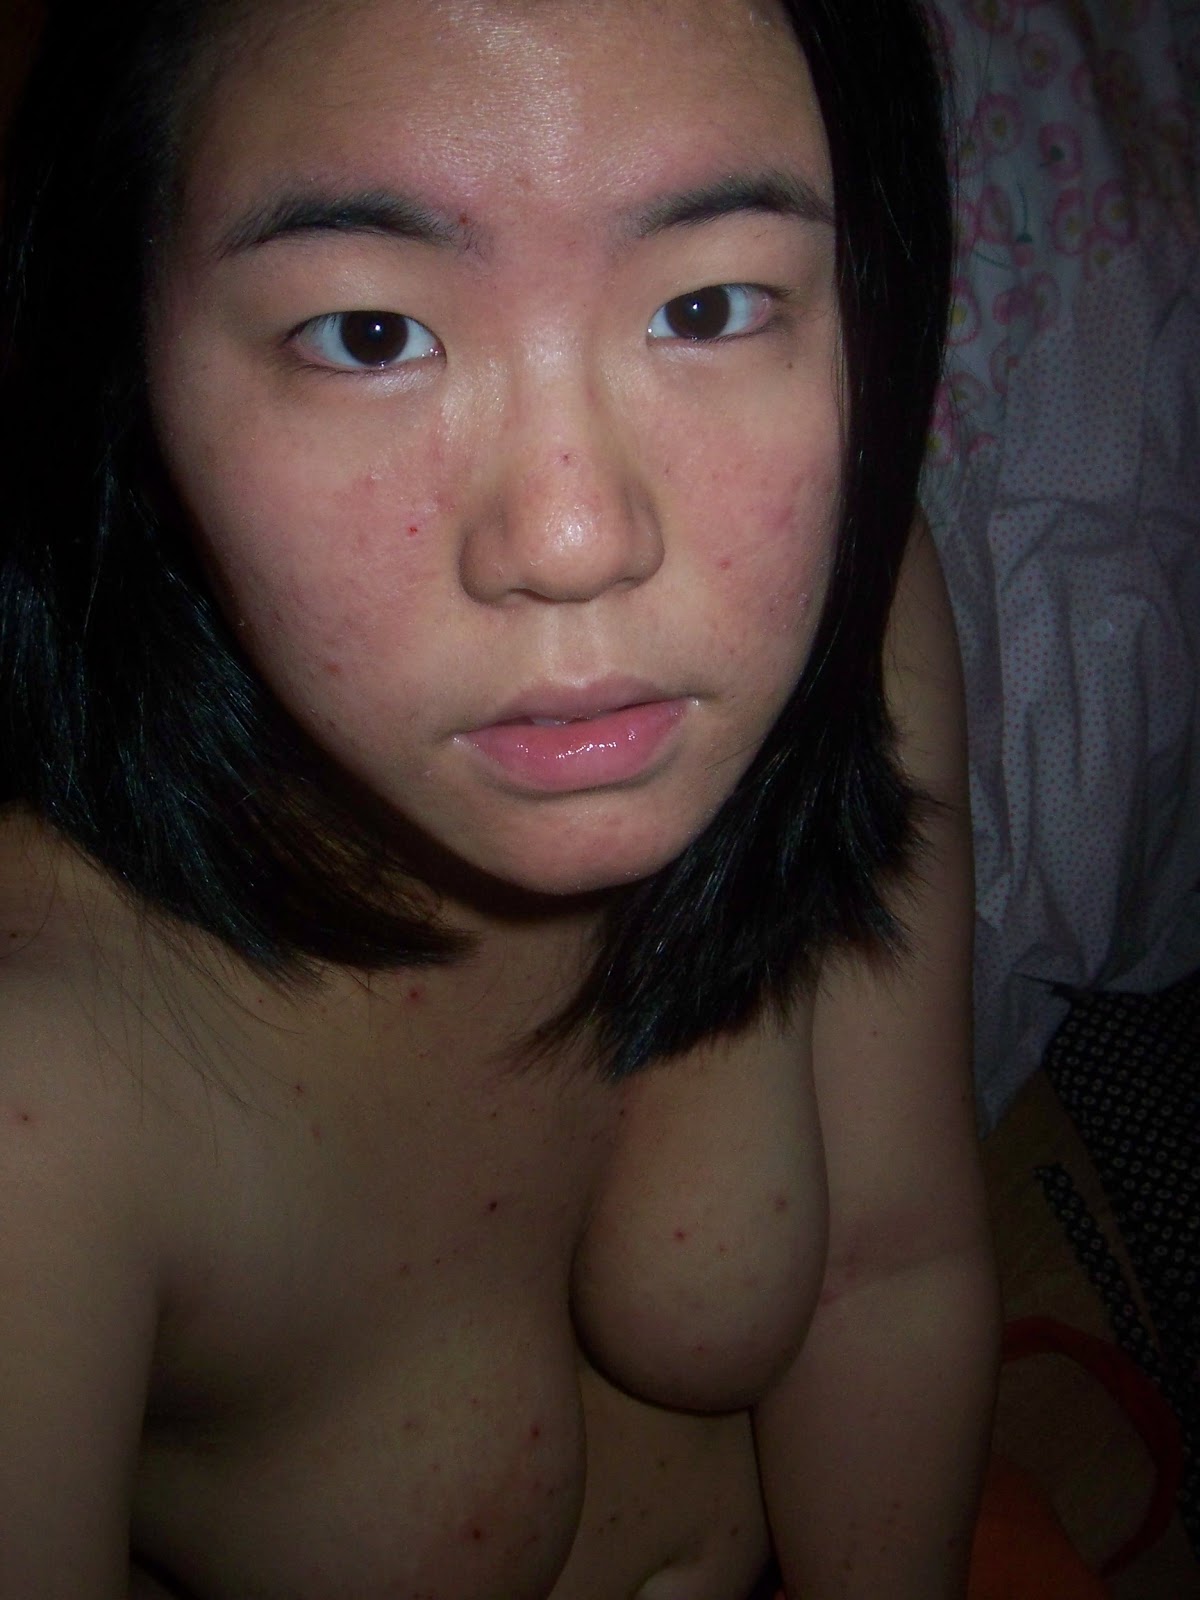 Ugly Asian Chick Naked In Bathroom